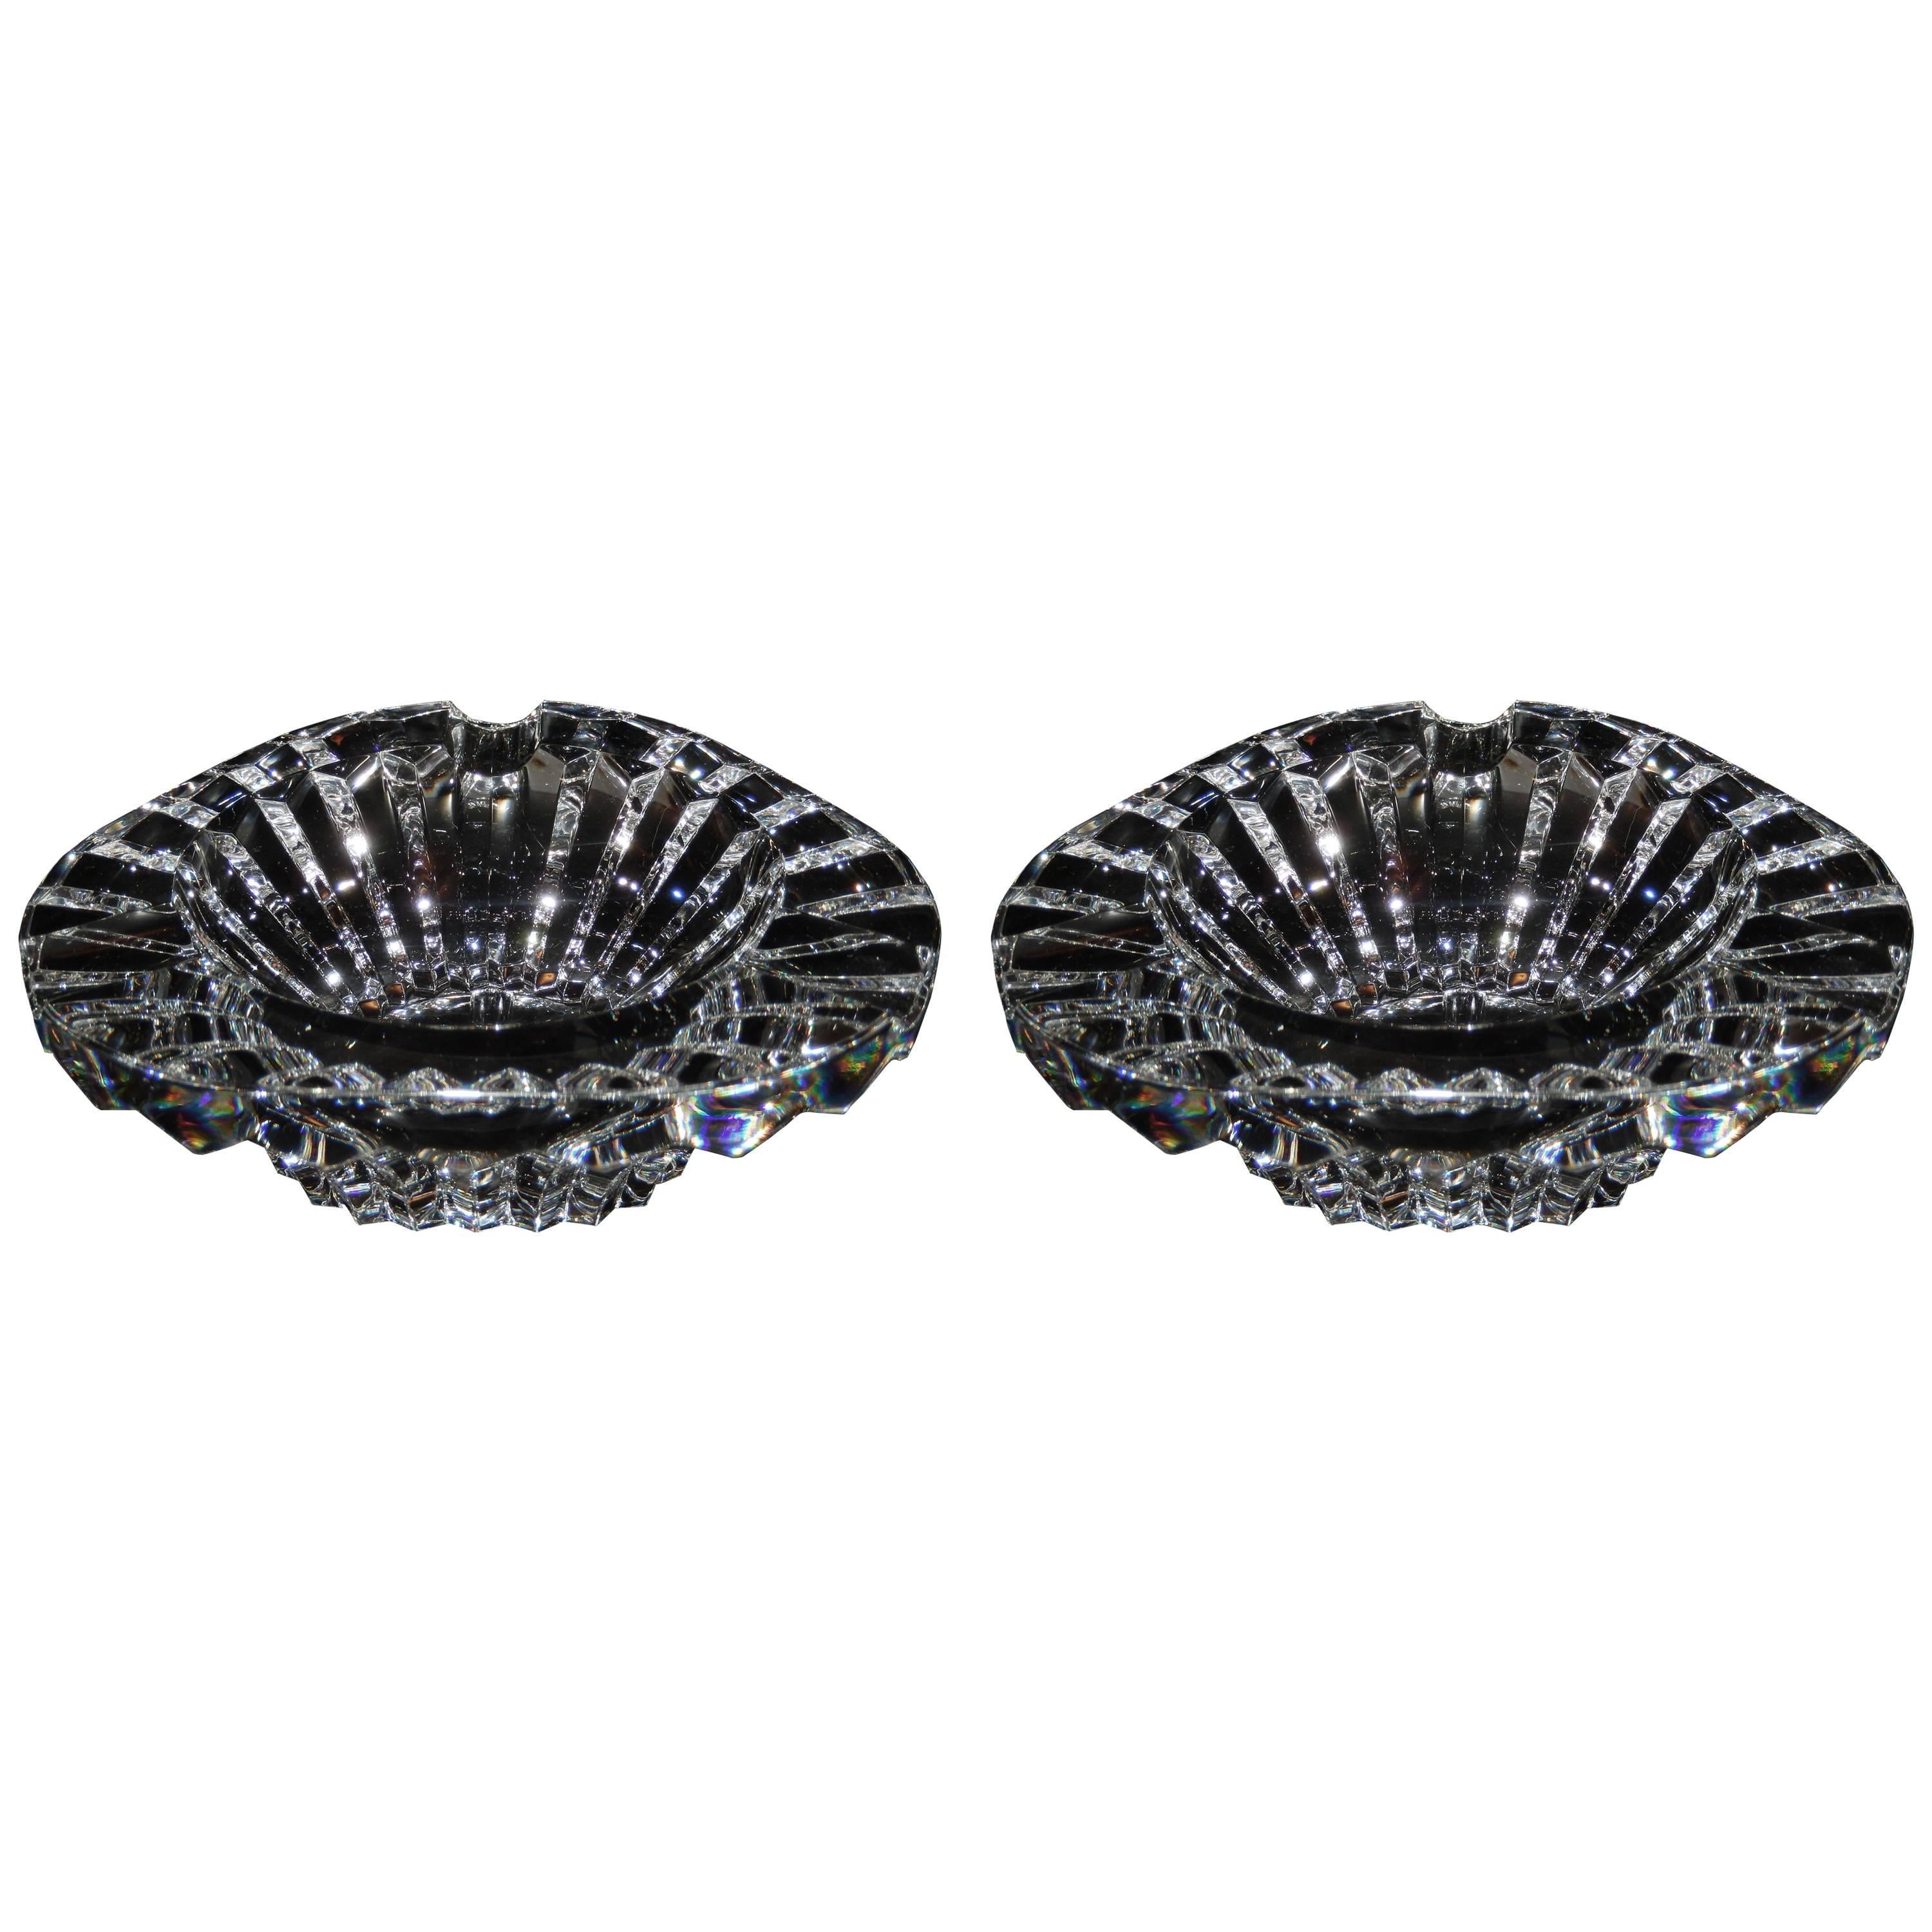 Pair of 1970s, Baccarat Heavy Crystal Ashtrays